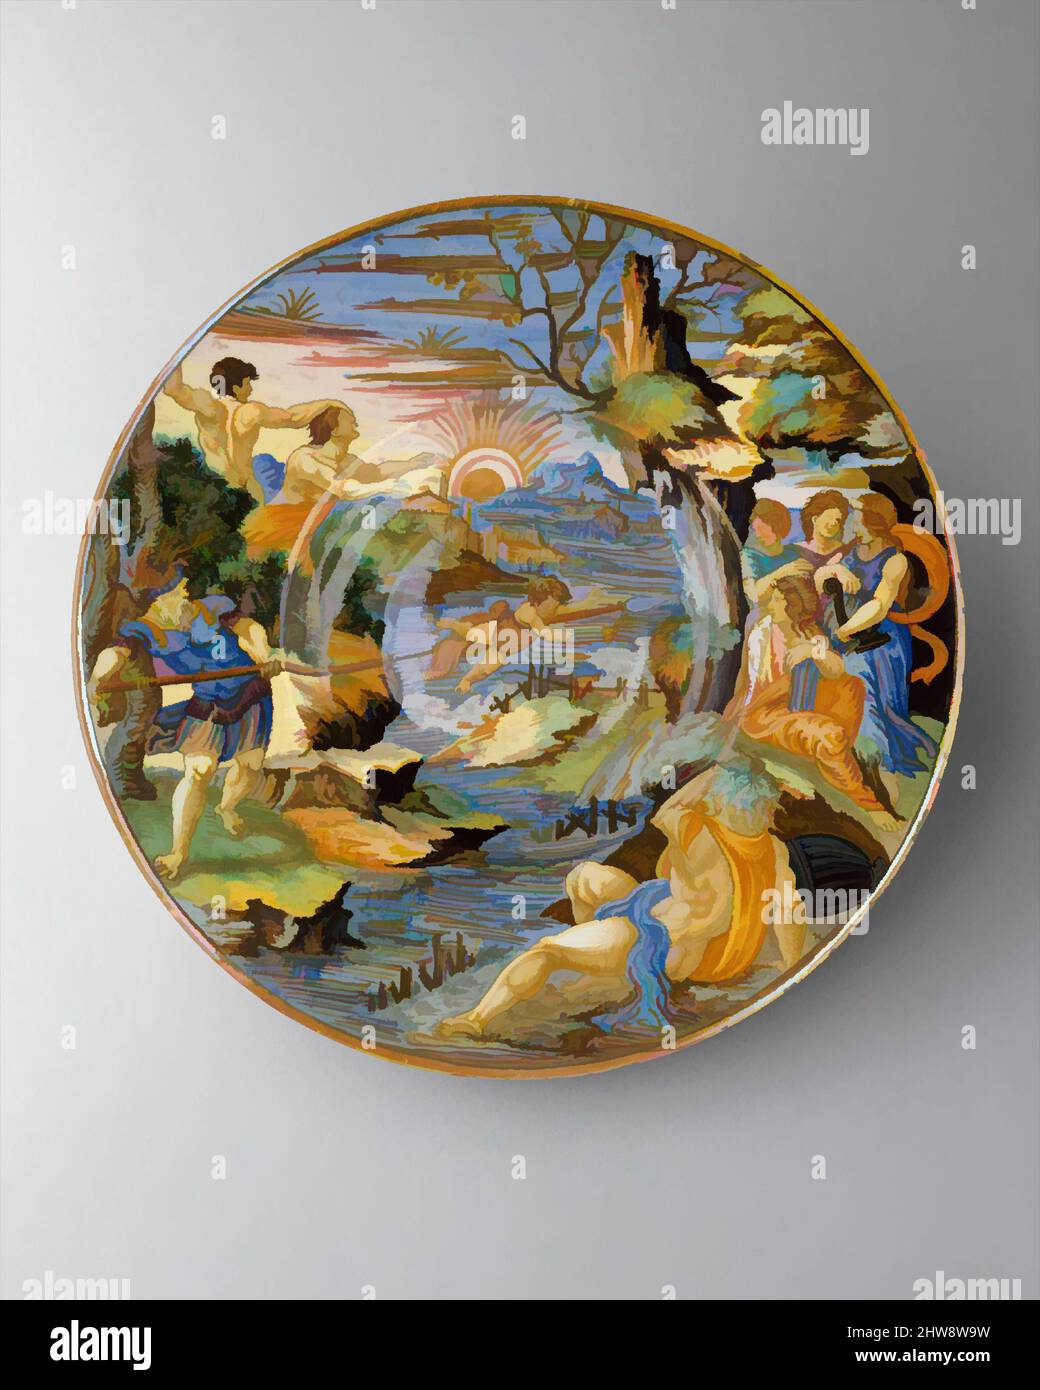 Art inspired by Plate (tagliere), 1539, Maiolica (tin-glazed earthenware), Diameter: 11 11/16 in. (29.7cm), Ceramics-Pottery, Francesco Xanto Avelli da Rovigo (Italian, Rovigo ca7–1542, Classic works modernized by Artotop with a splash of modernity. Shapes, color and value, eye-catching visual impact on art. Emotions through freedom of artworks in a contemporary way. A timeless message pursuing a wildly creative new direction. Artists turning to the digital medium and creating the Artotop NFT Stock Photo